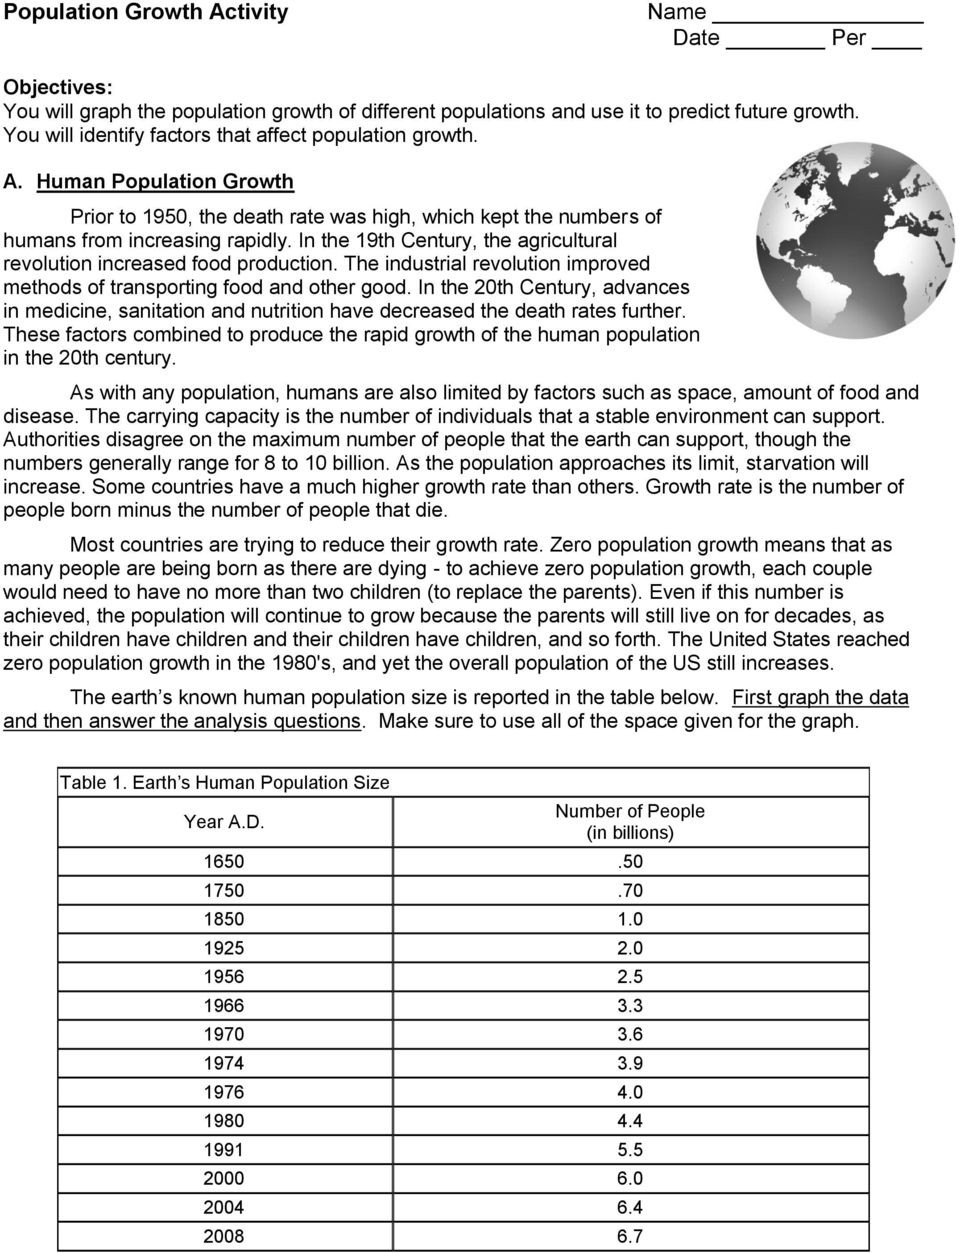 Population Growth Worksheet Answers Population Growth Activity Date Per Pdf Free Download